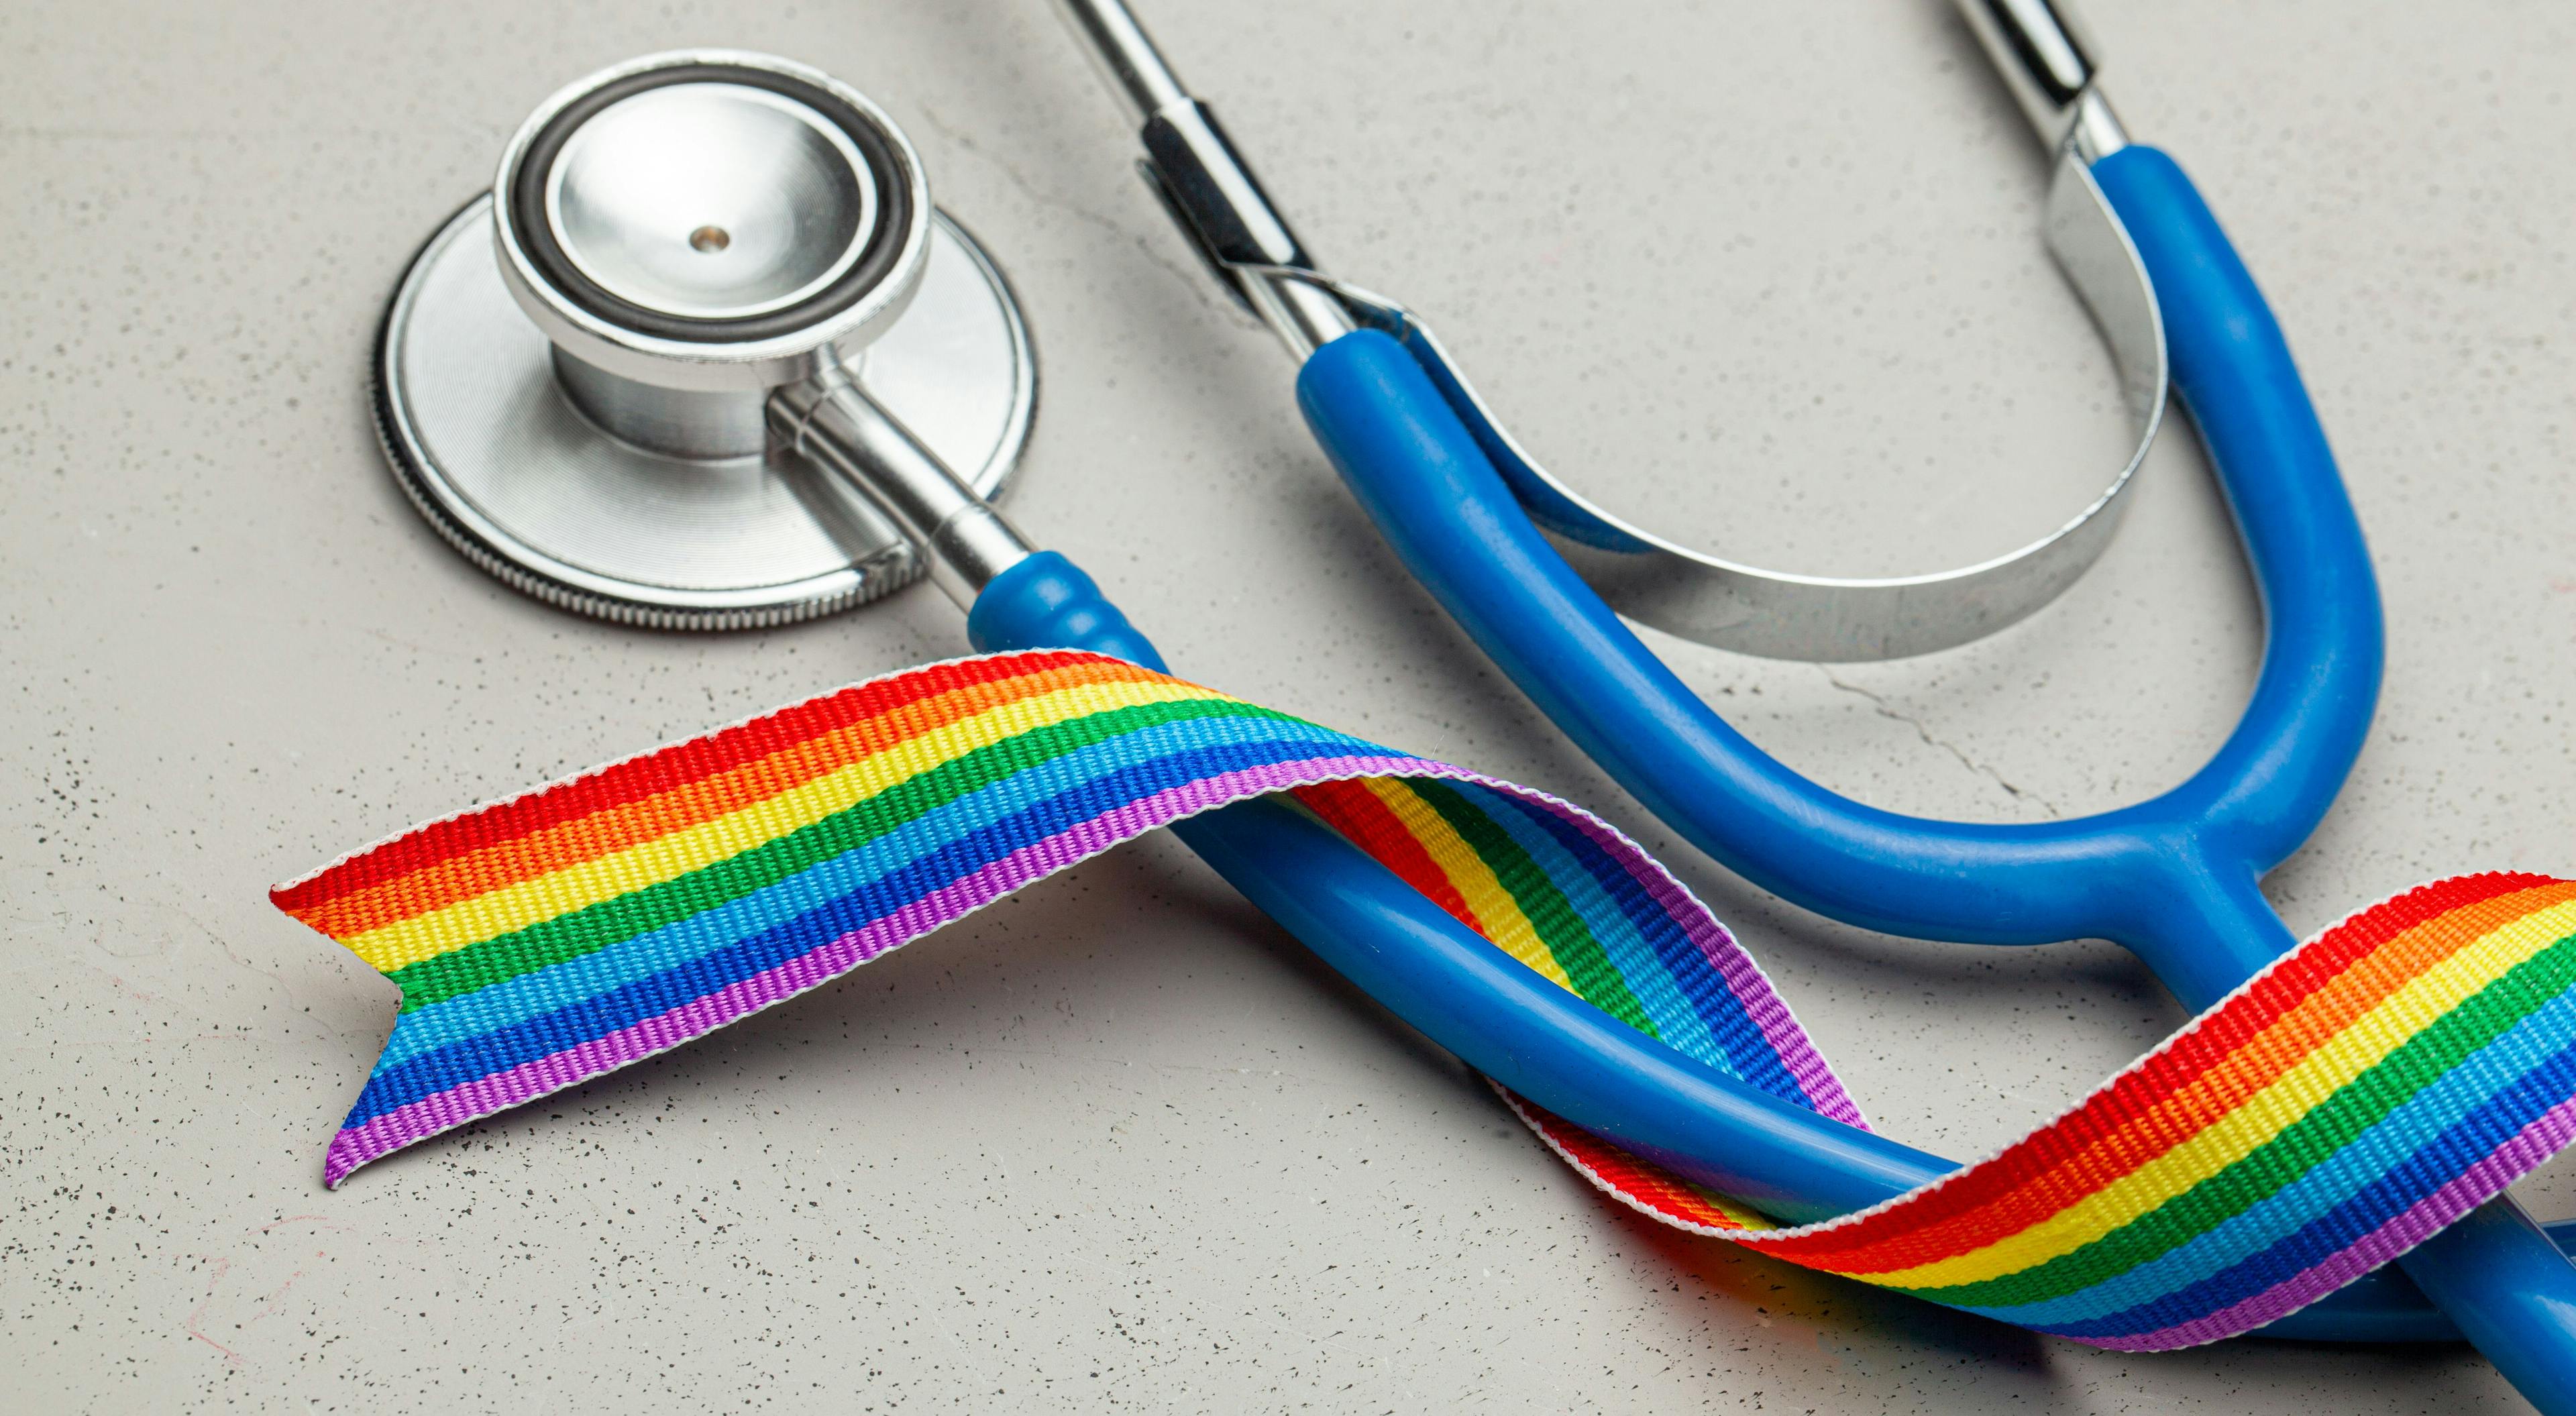 Nurses, Create a Welcoming Environment for LGBTQ Patients